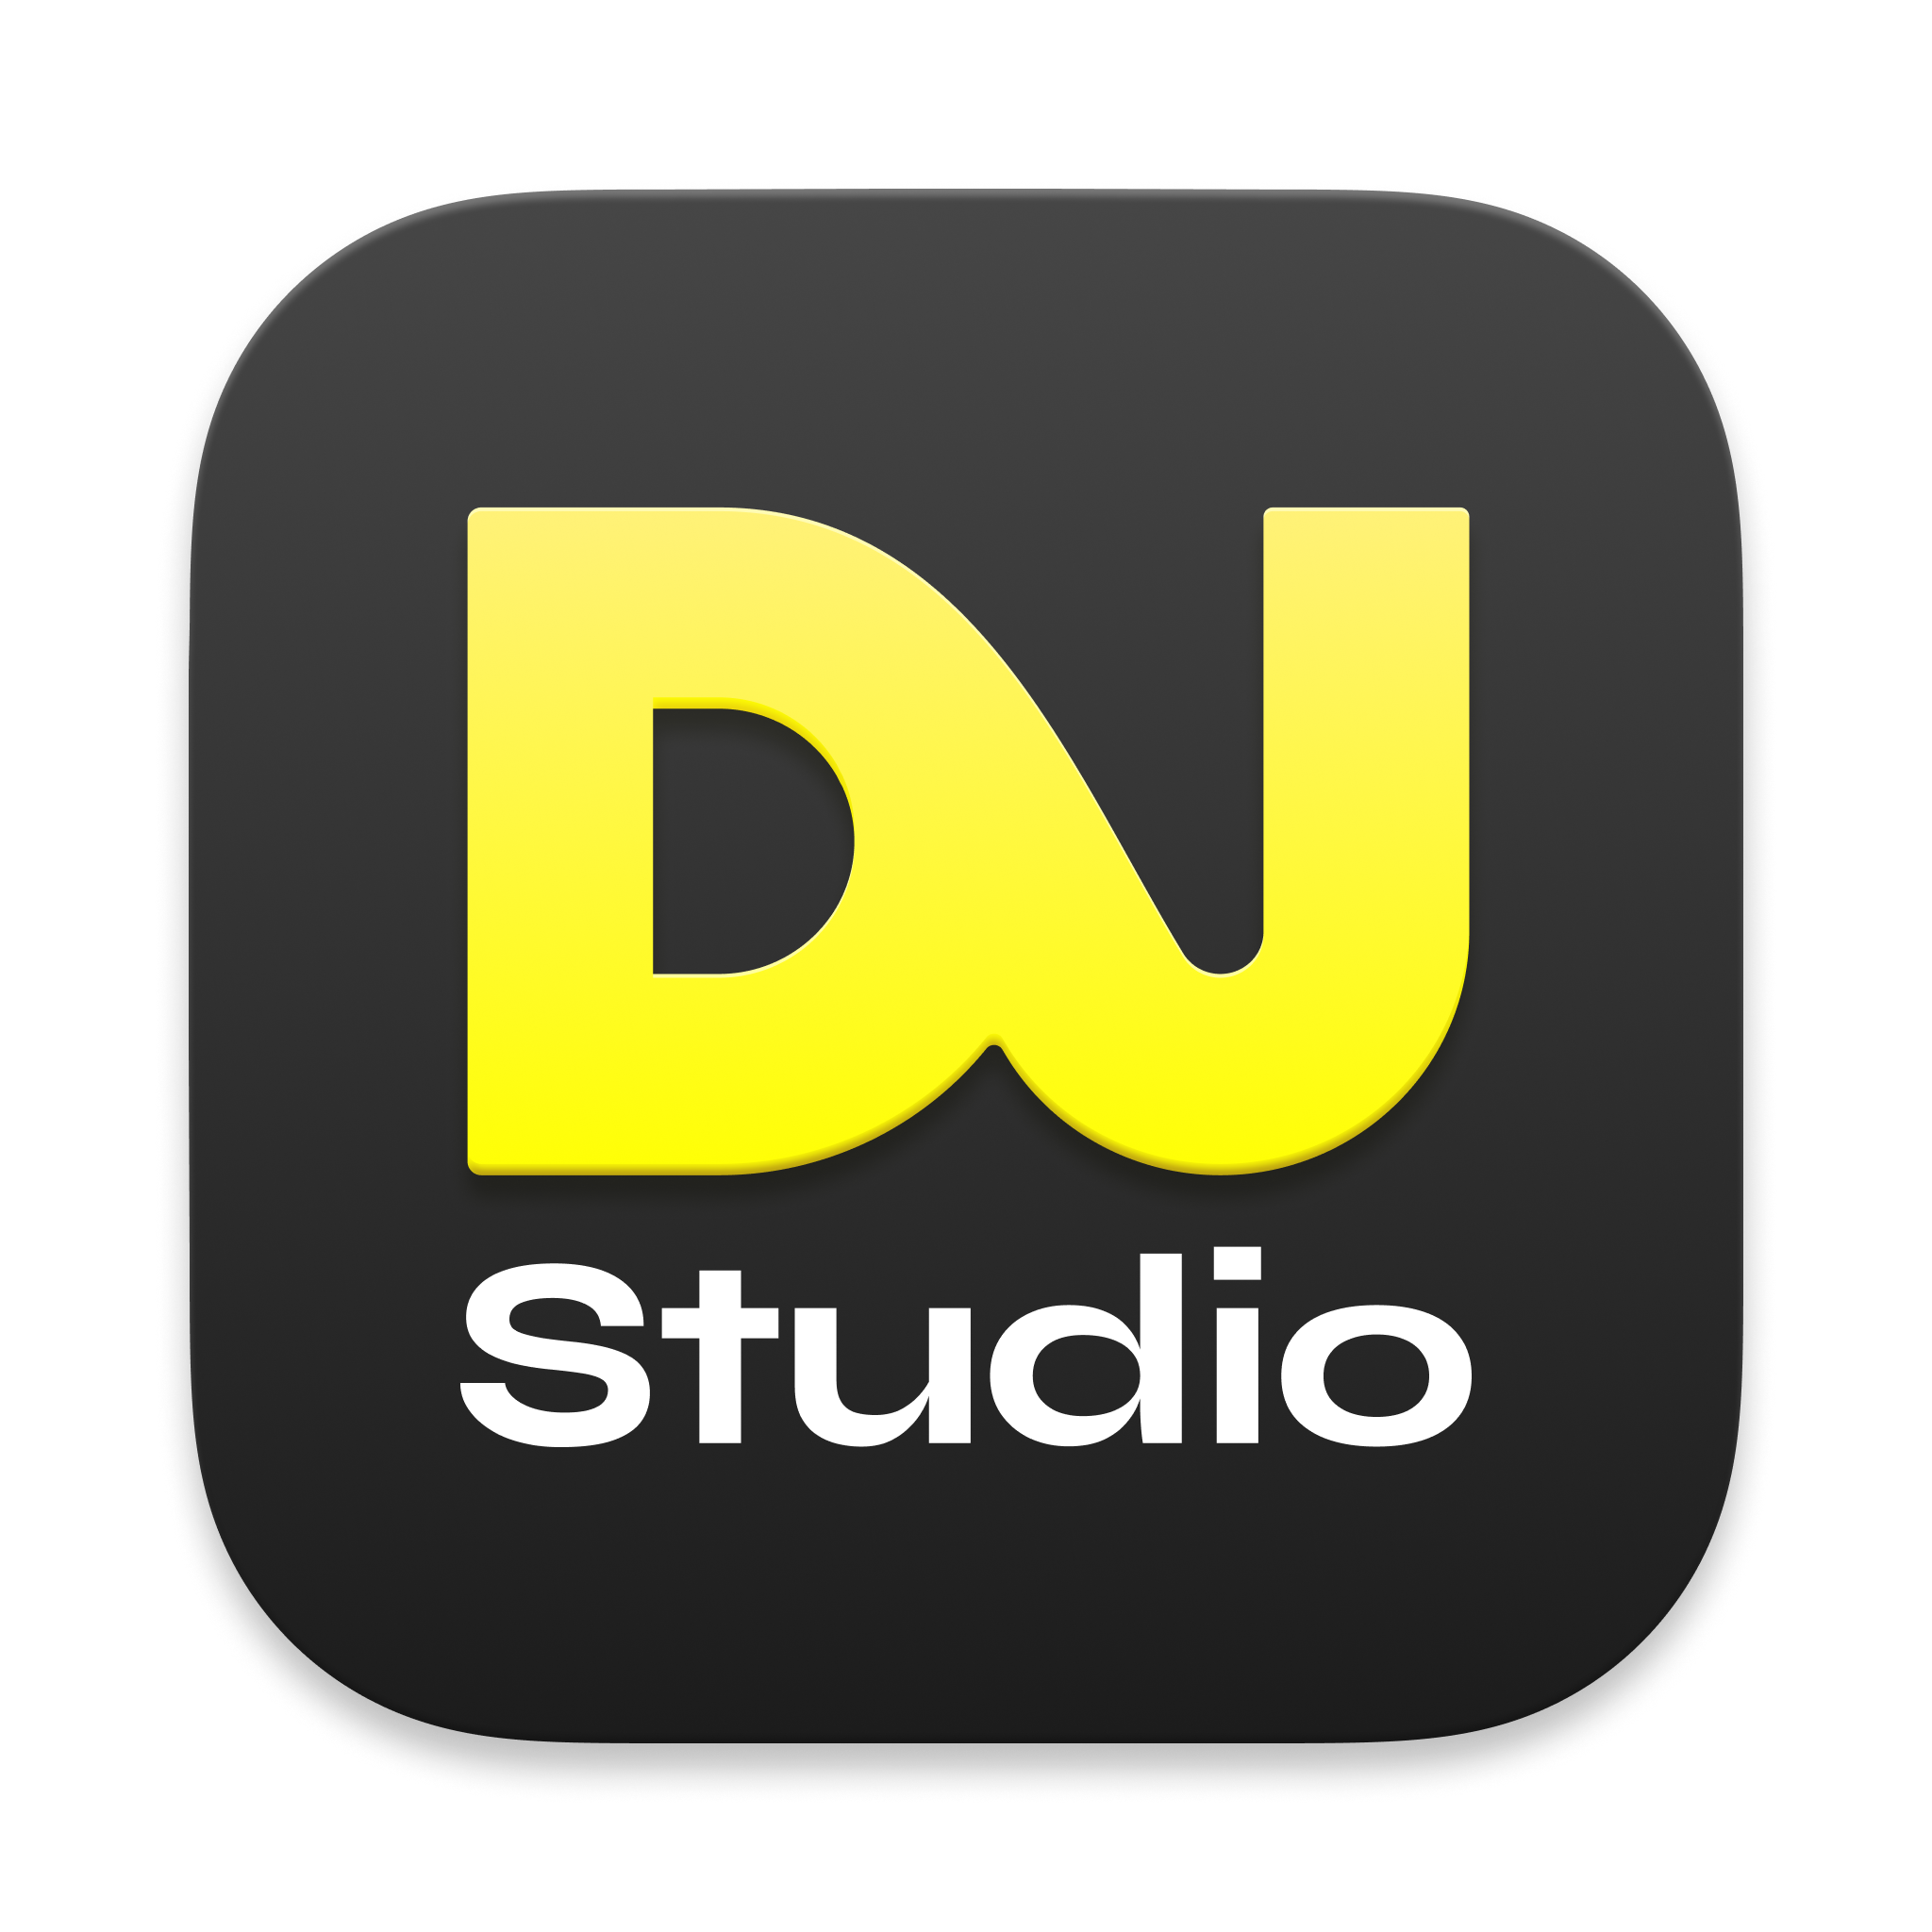 [FOUNDER INTERVIEW & PRODUCT REVIEW] DJ.Studio: Shaping The Future Of Mixing